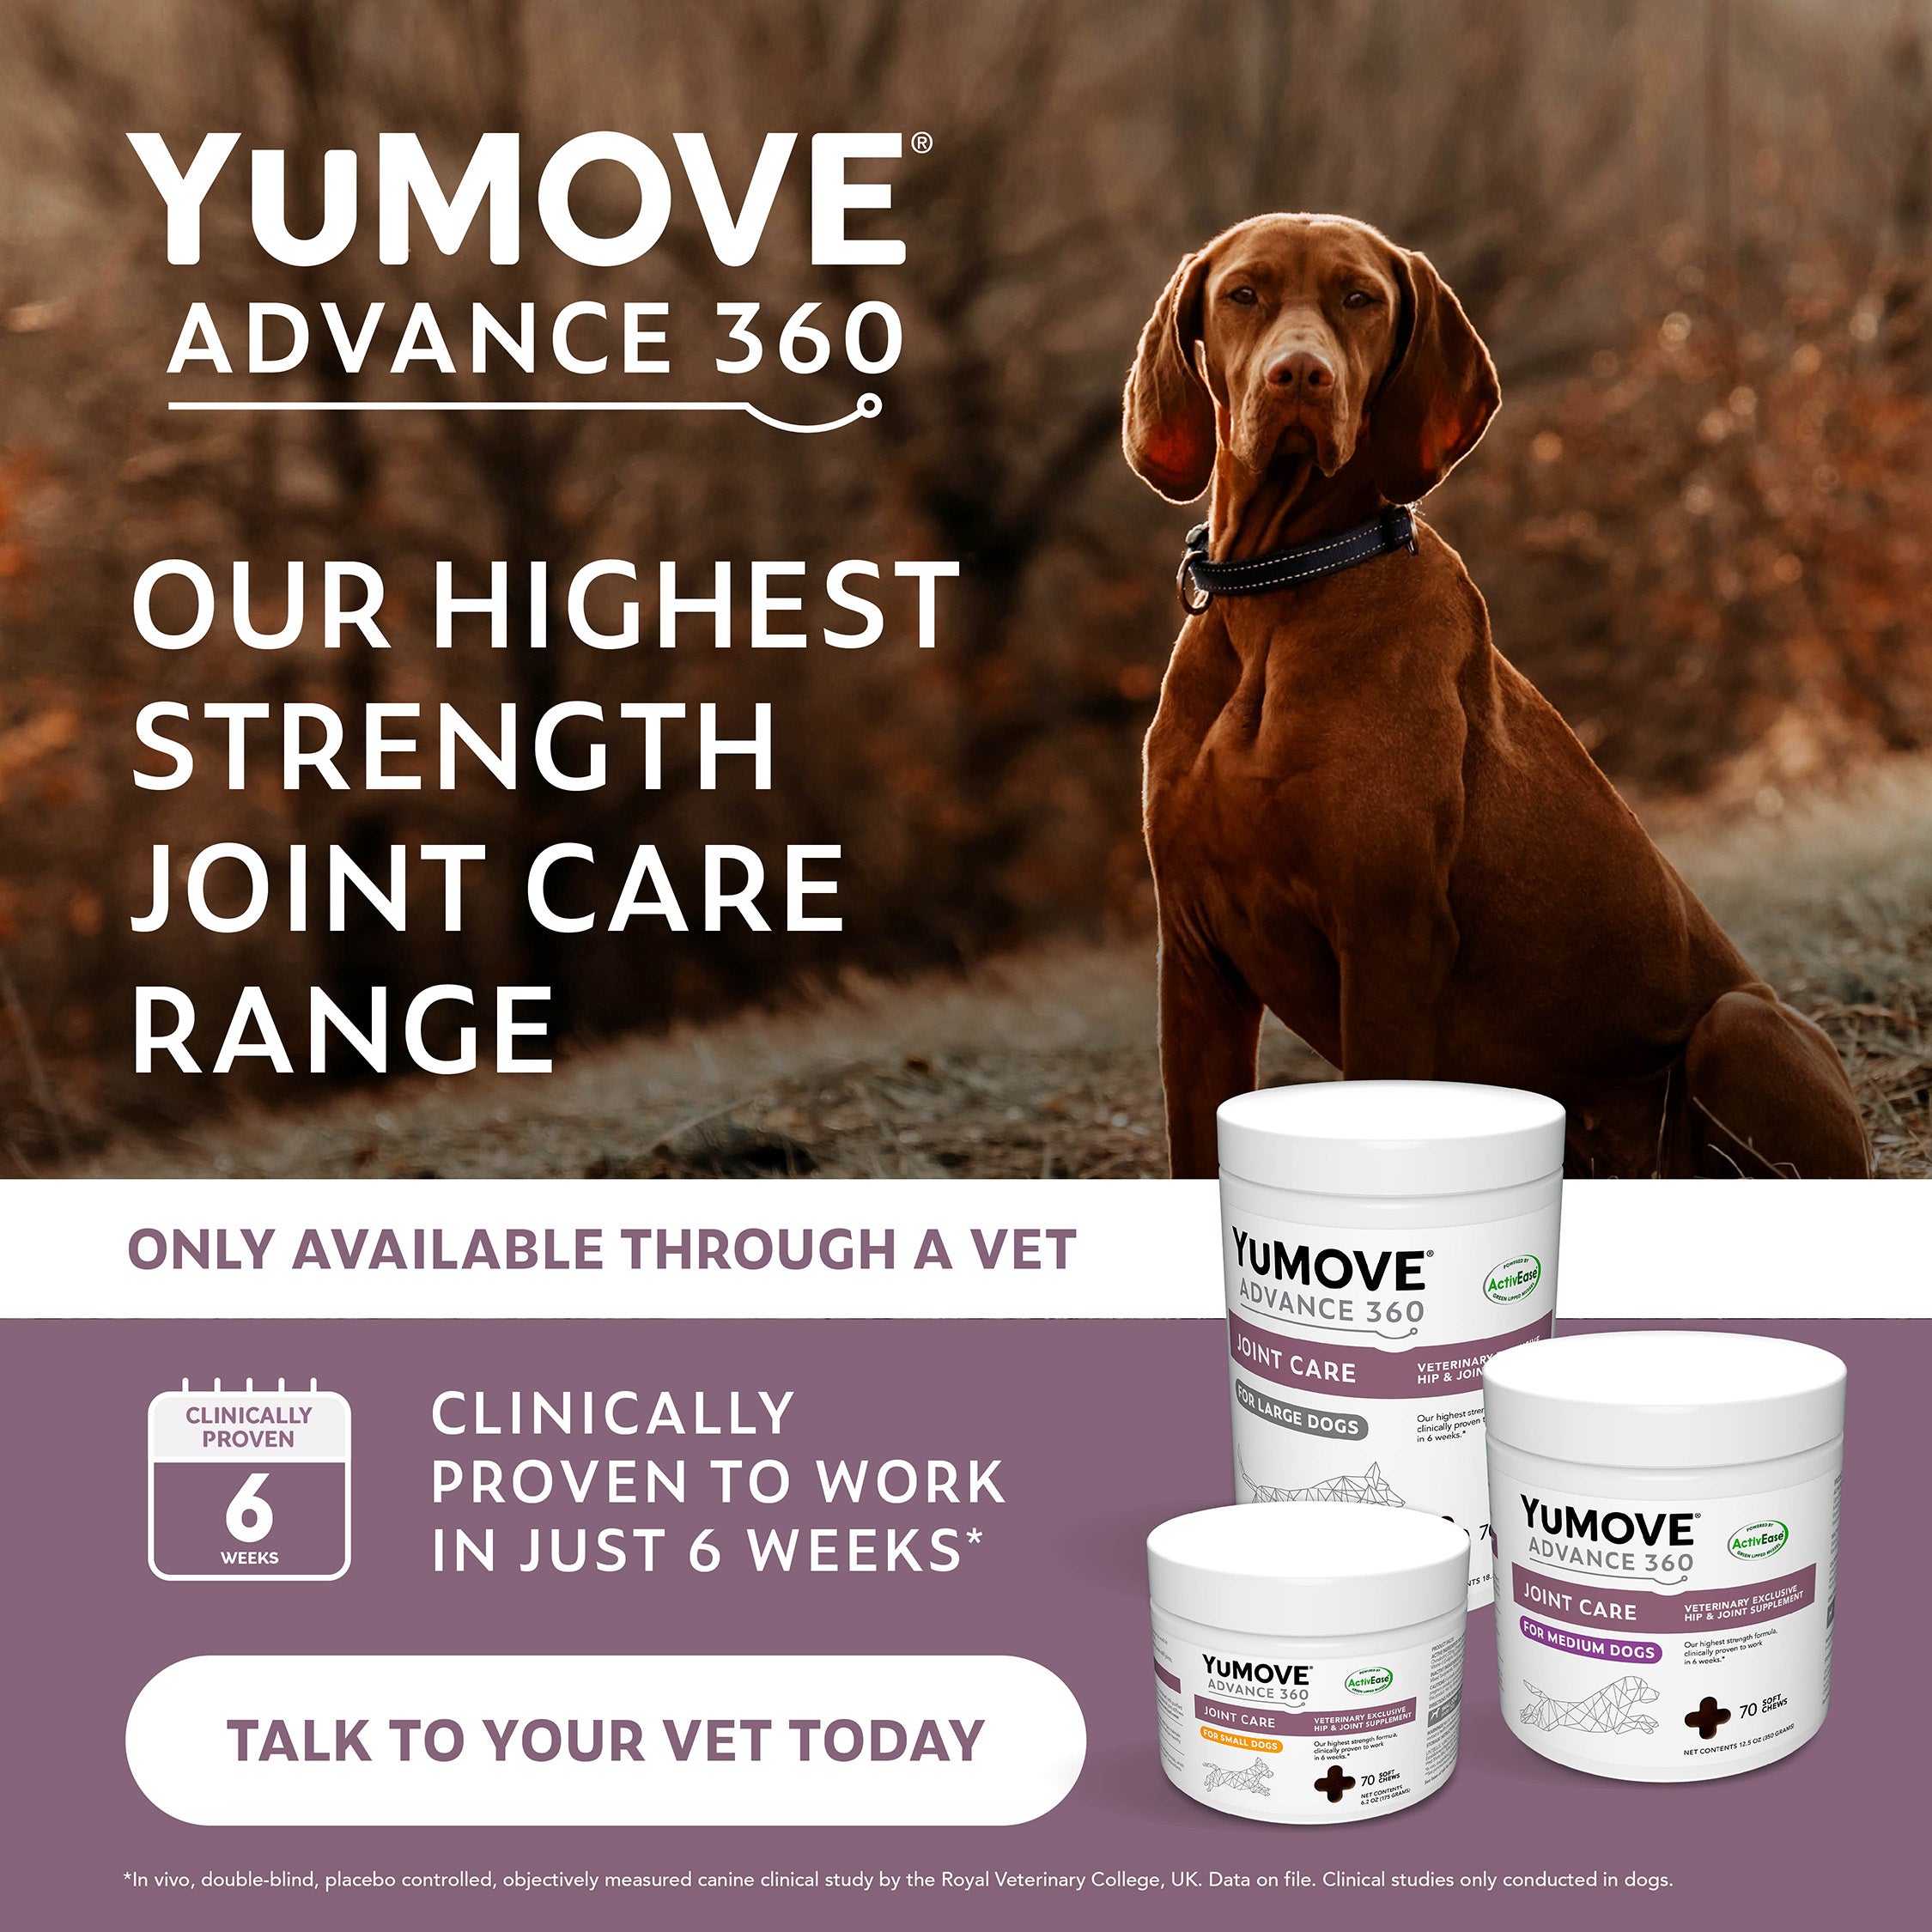 A header banner showing a brown dog sitting on frosty grass in late autumn or winter alongside three containers of YuMOVE ADVANCE 360 Joint Care for Dogs and a graphic stylized icon of a badge that says "CLINICALLY PROVEN 6 WEEKS*" and a white roundall that says "TALK TO YOUR VET TODAY". Text reads "OUR HIGHEST STRENGTH JOINT CARE RANGE" "ONLY AVAILABLE THROUGH A VET" and "CLINICALLY PROVEN TO WORK IN JUST 6 WEEKS*".